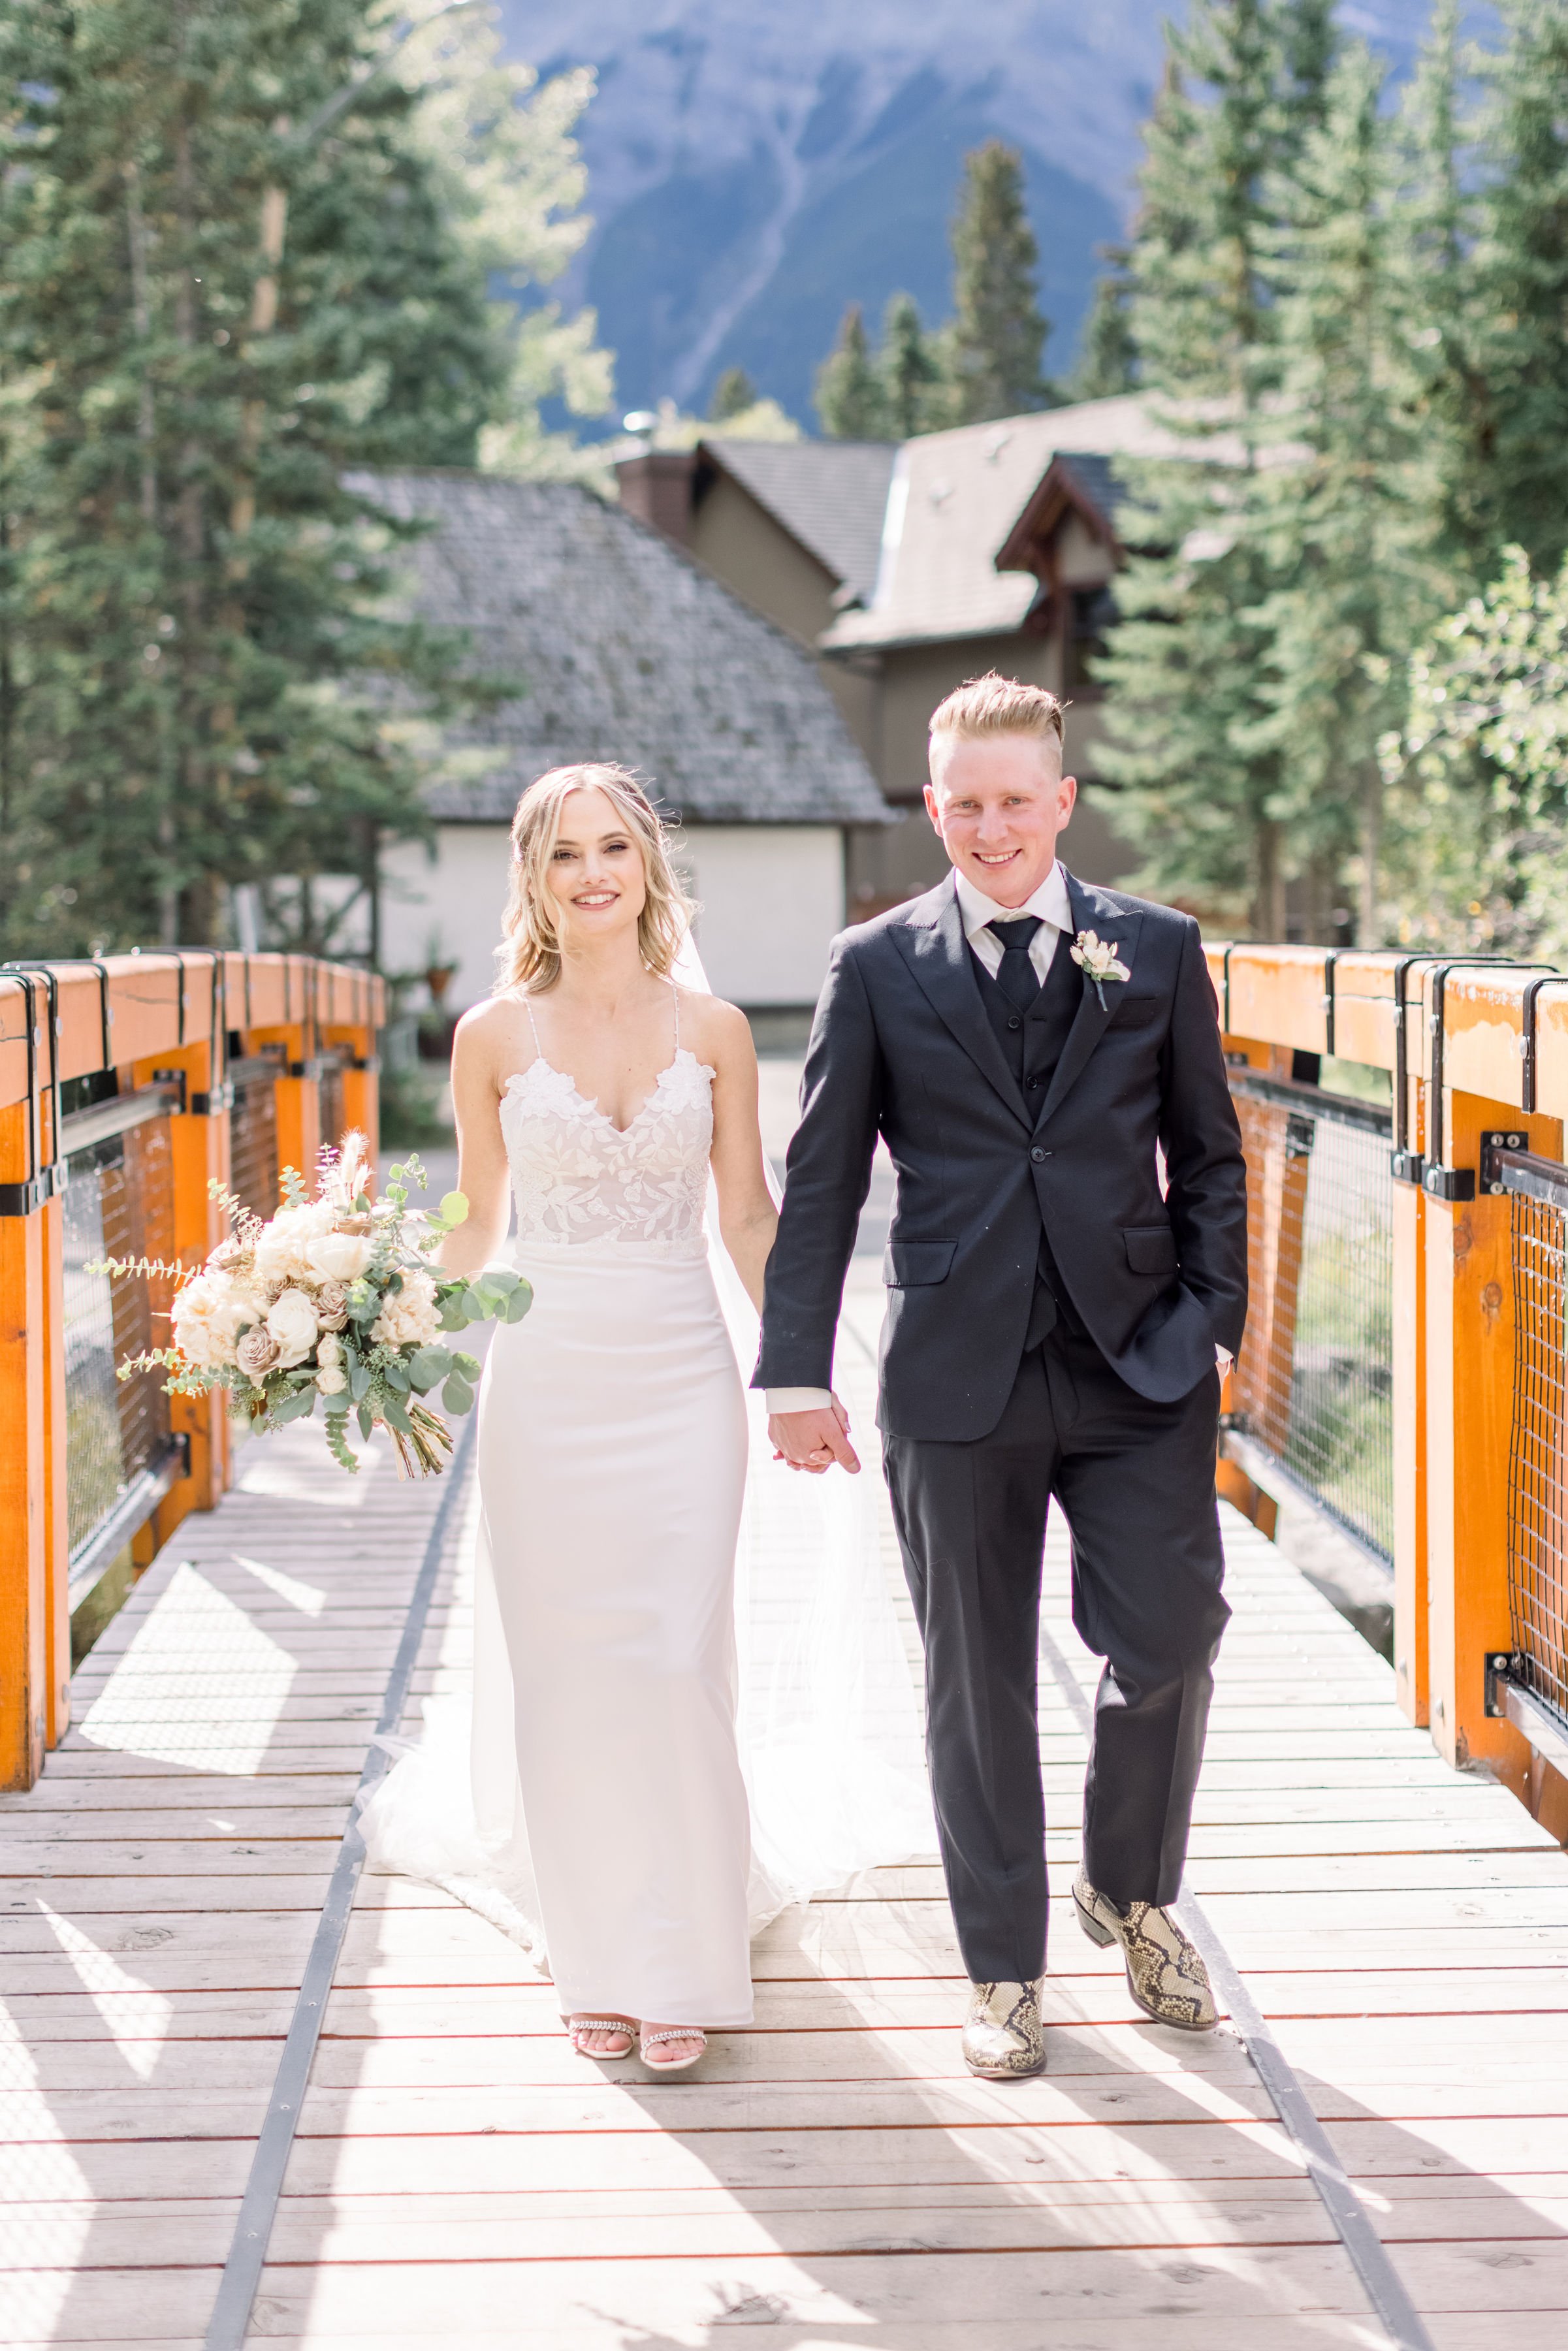  Chelsea Mason Photography captures the bride and groom walking hand in hand during a forest wedding. newlywed portraits #Albertaweddings #shesaidyes #Albertaweddingphotographers #SilvertipGolfCourse #ChelseaMasonPhotography #ChelseaMasonWeddings  